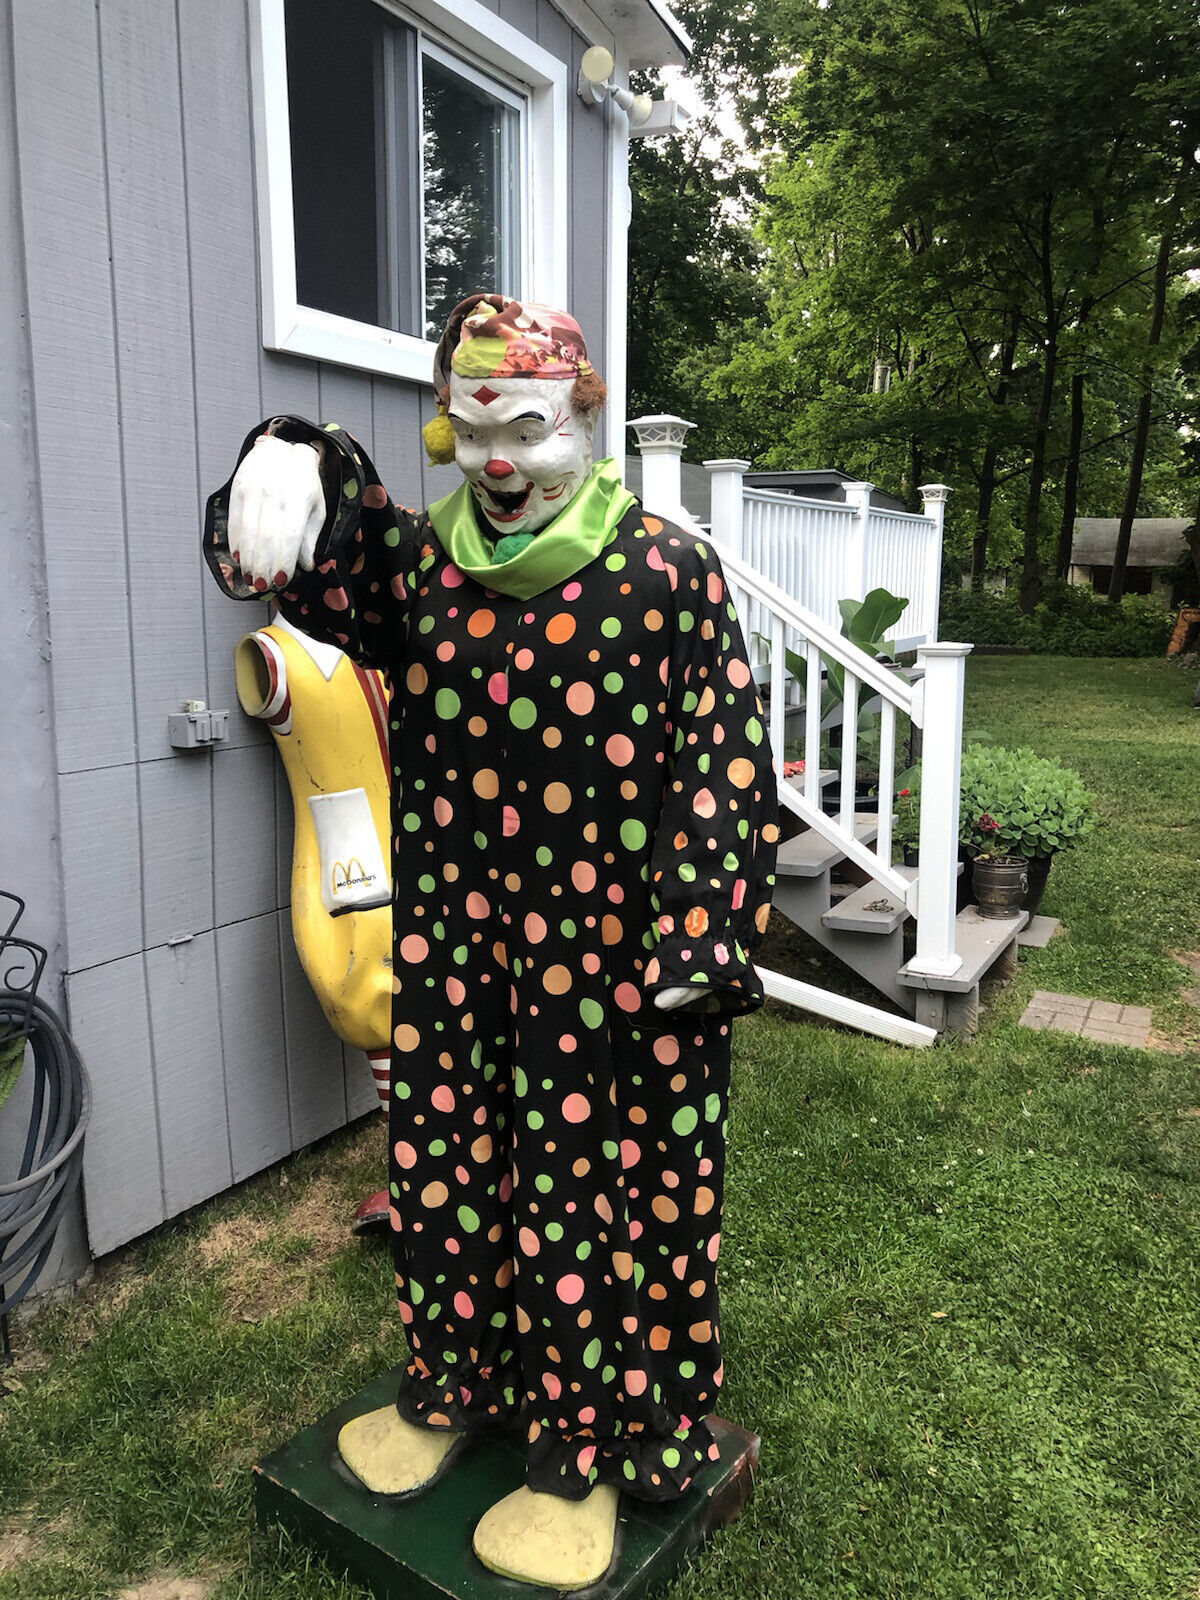 Vintage Mechanical Scary Clown “Life Size”